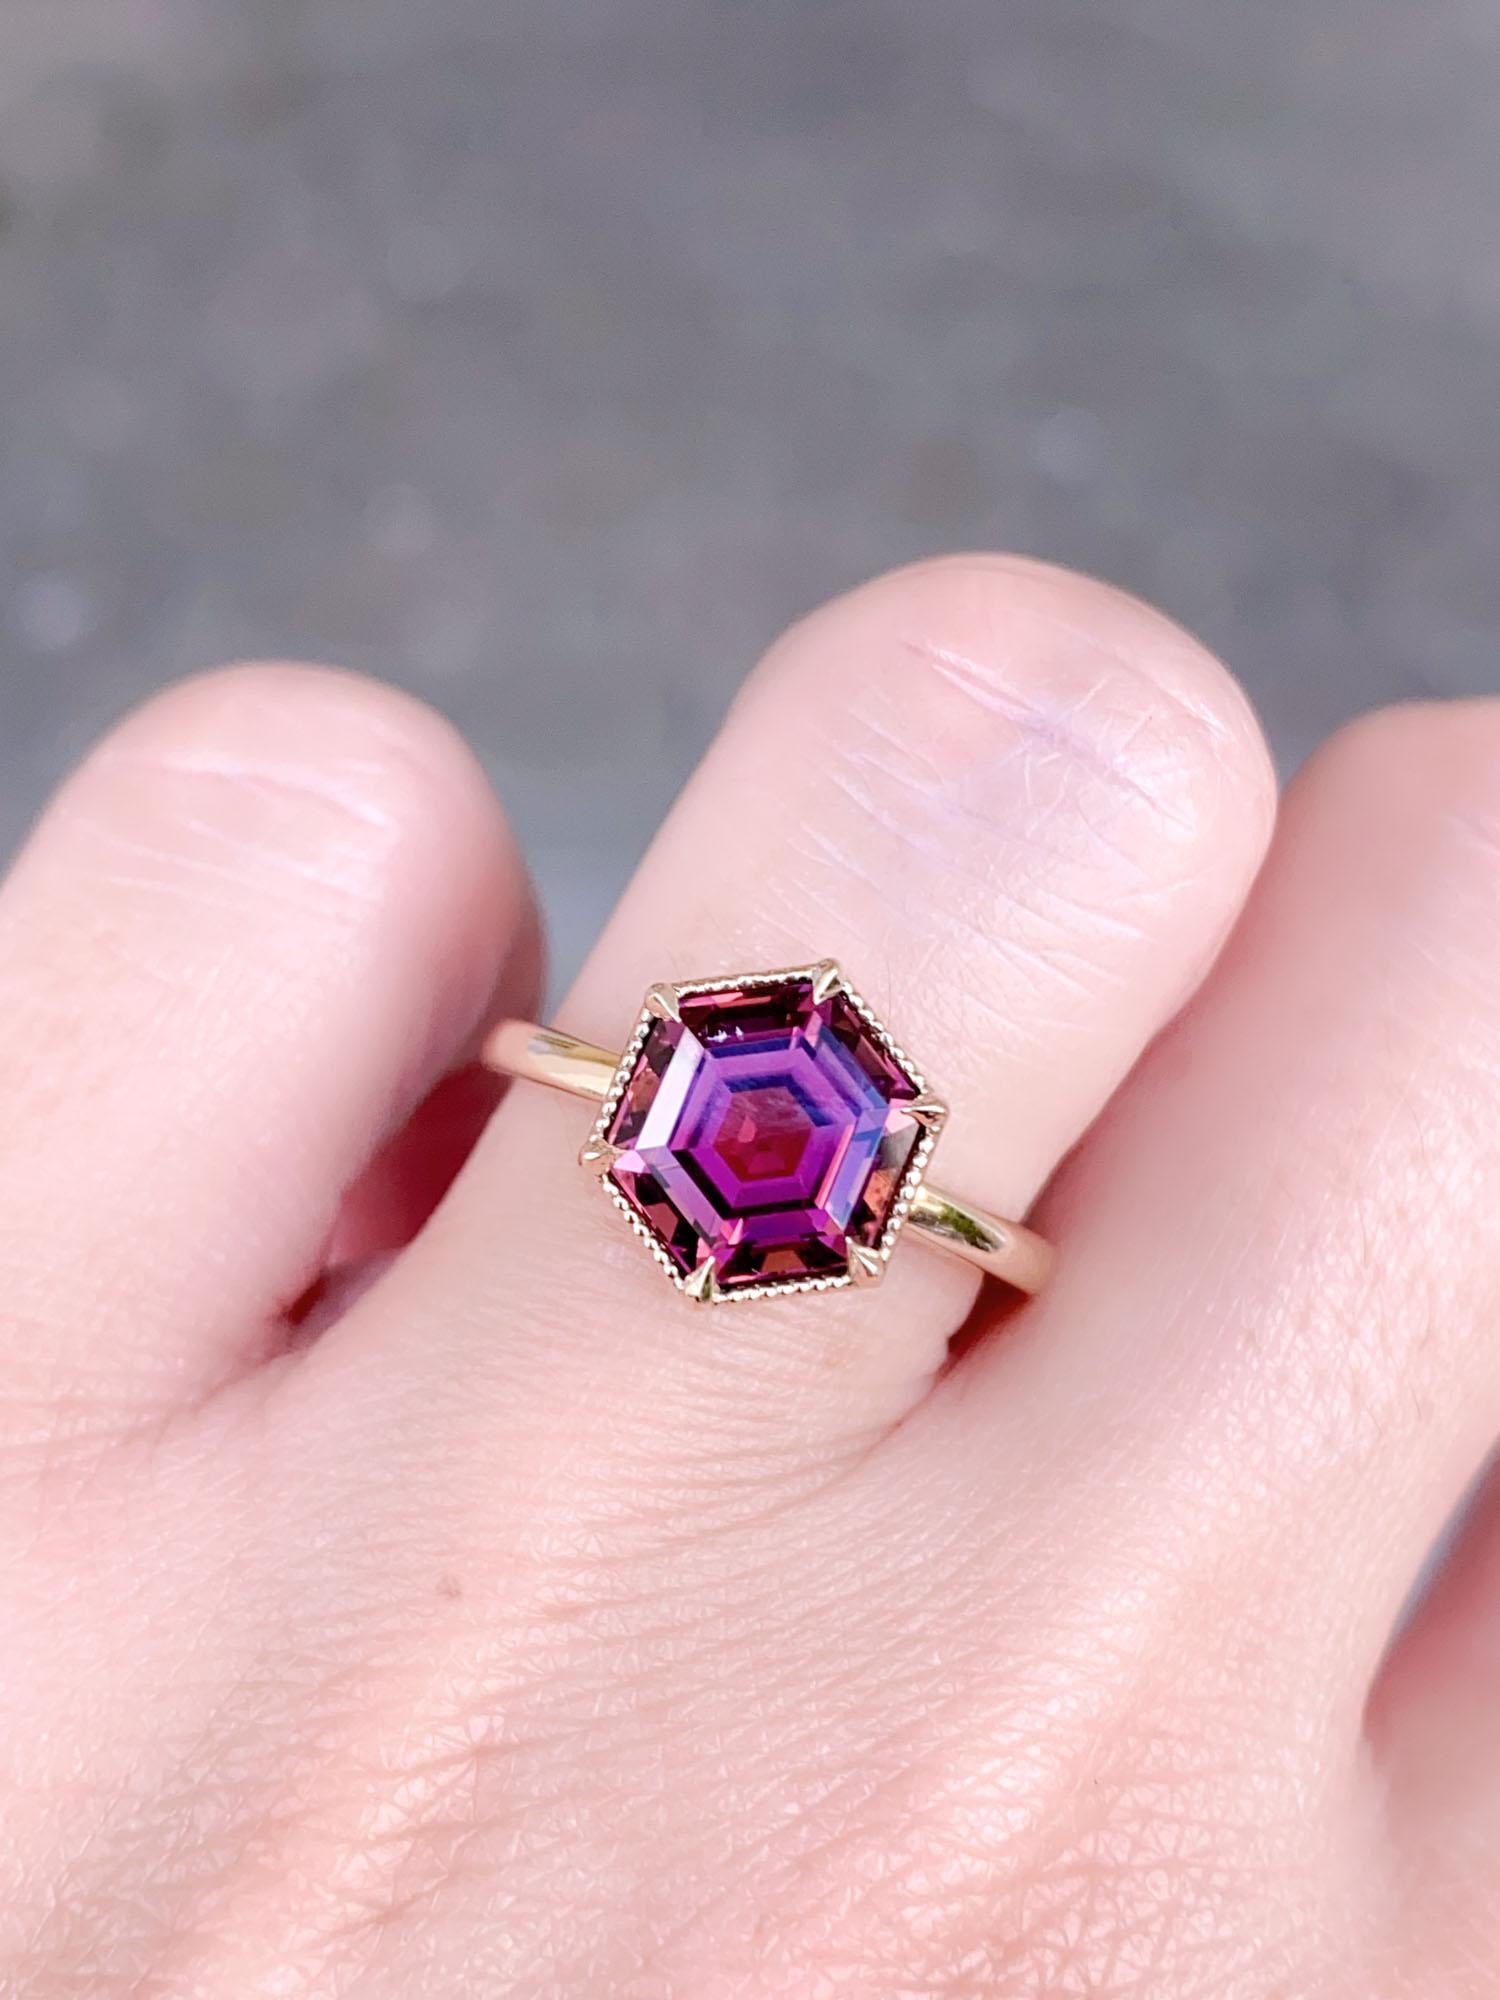 3.12ct Hexagon Rubellite Tourmaline Engagement Ring 14K Gold For Sale 1